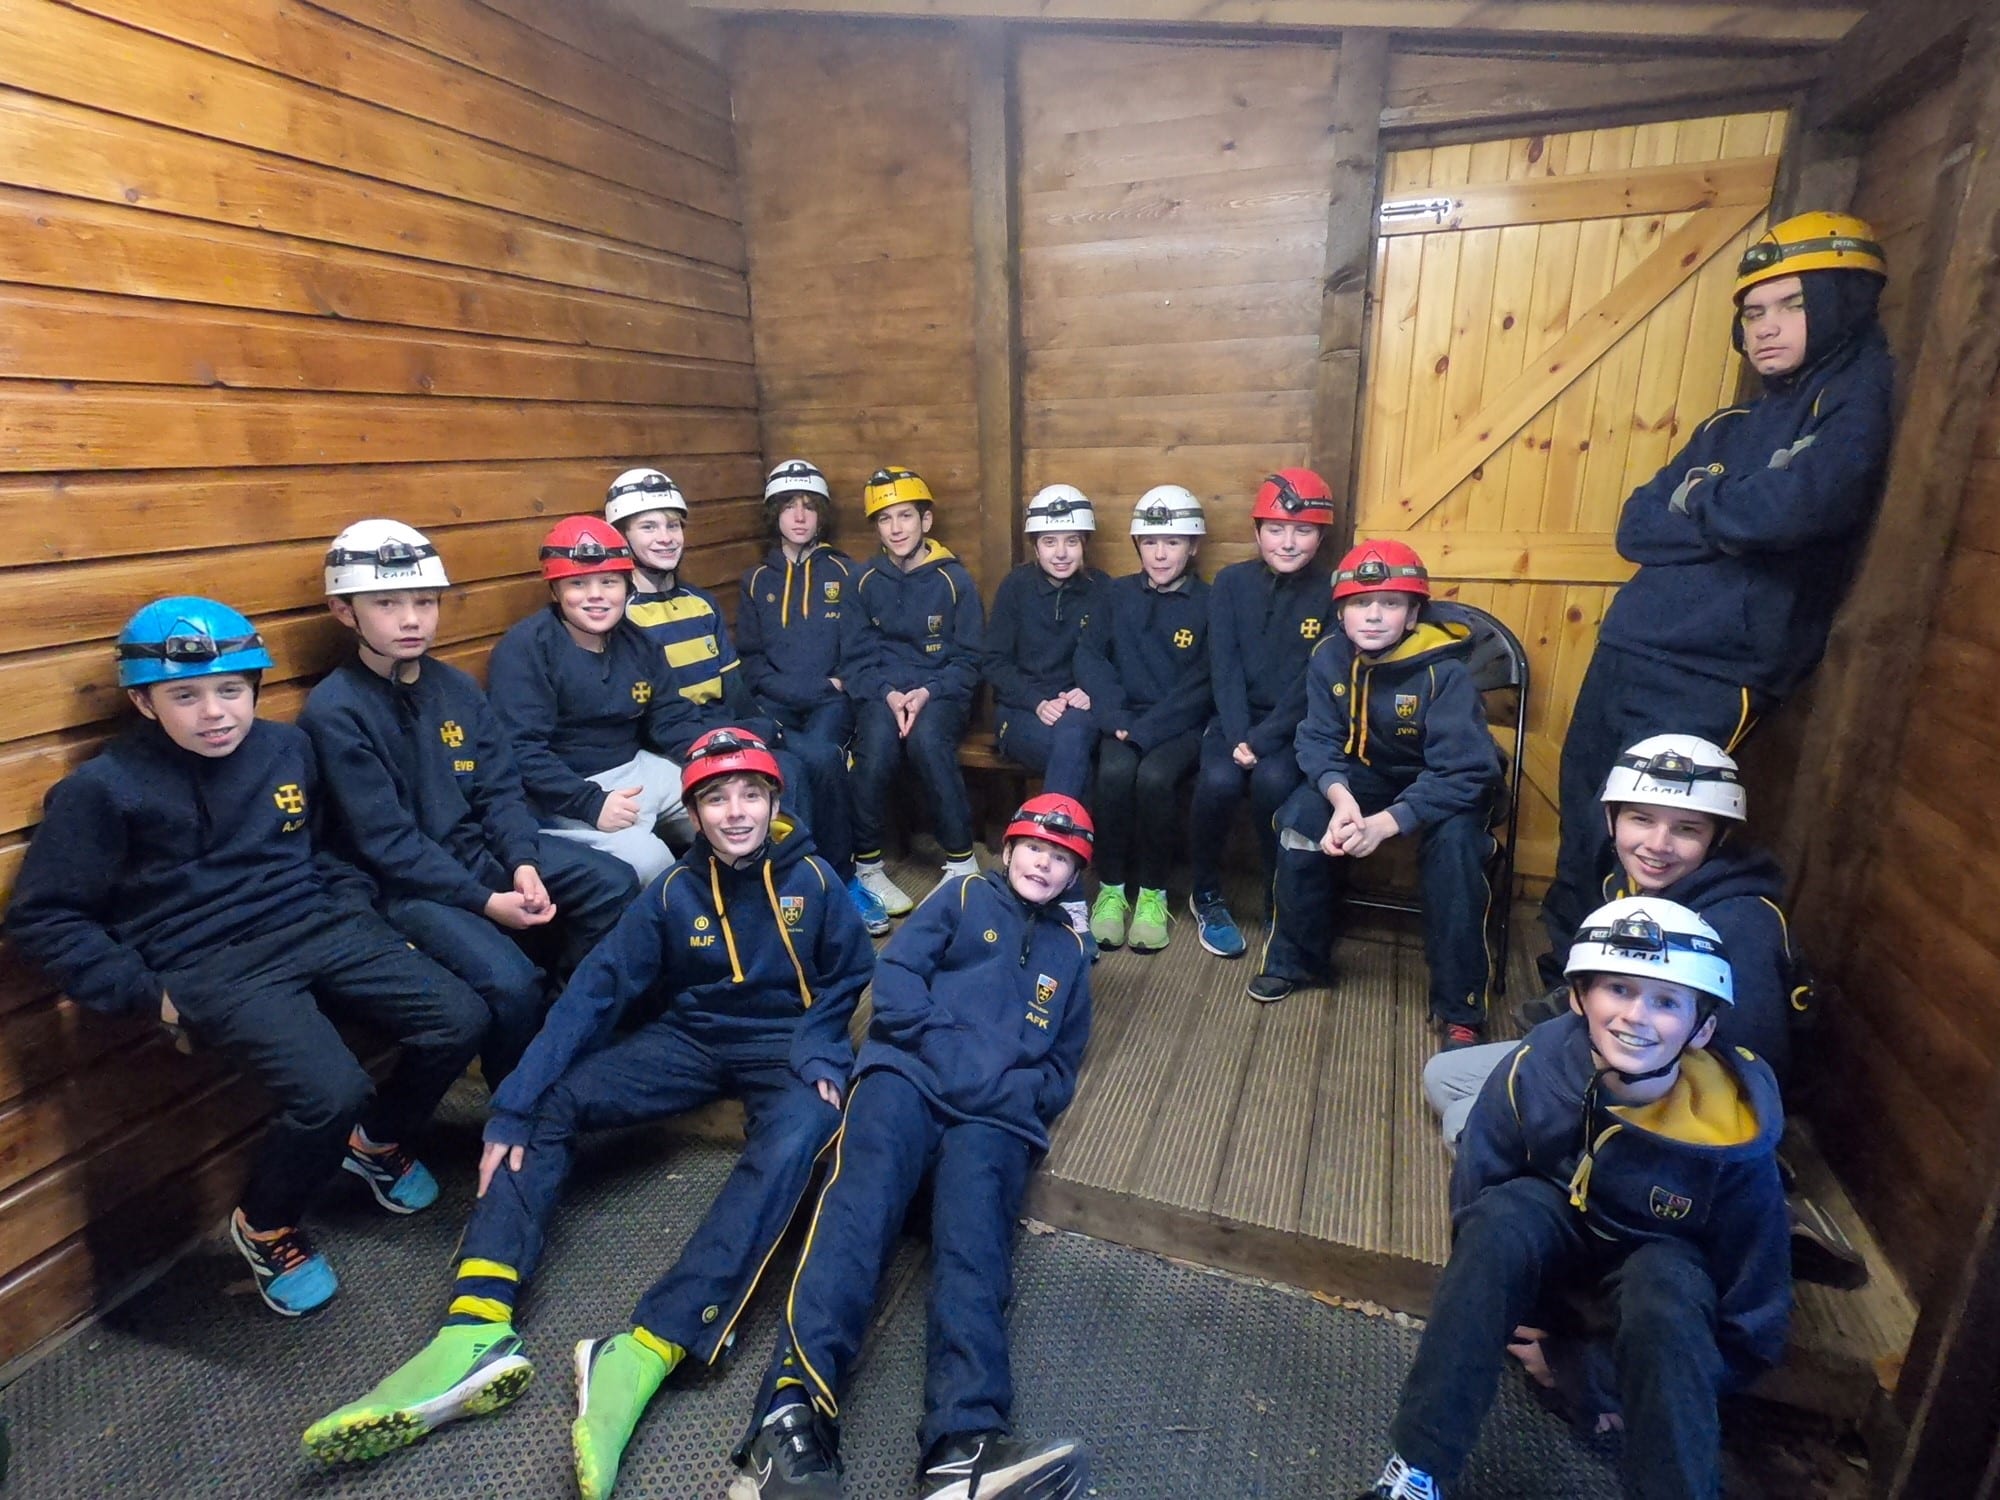 CAVING ACTIVITY FOR OUR BOARDERS